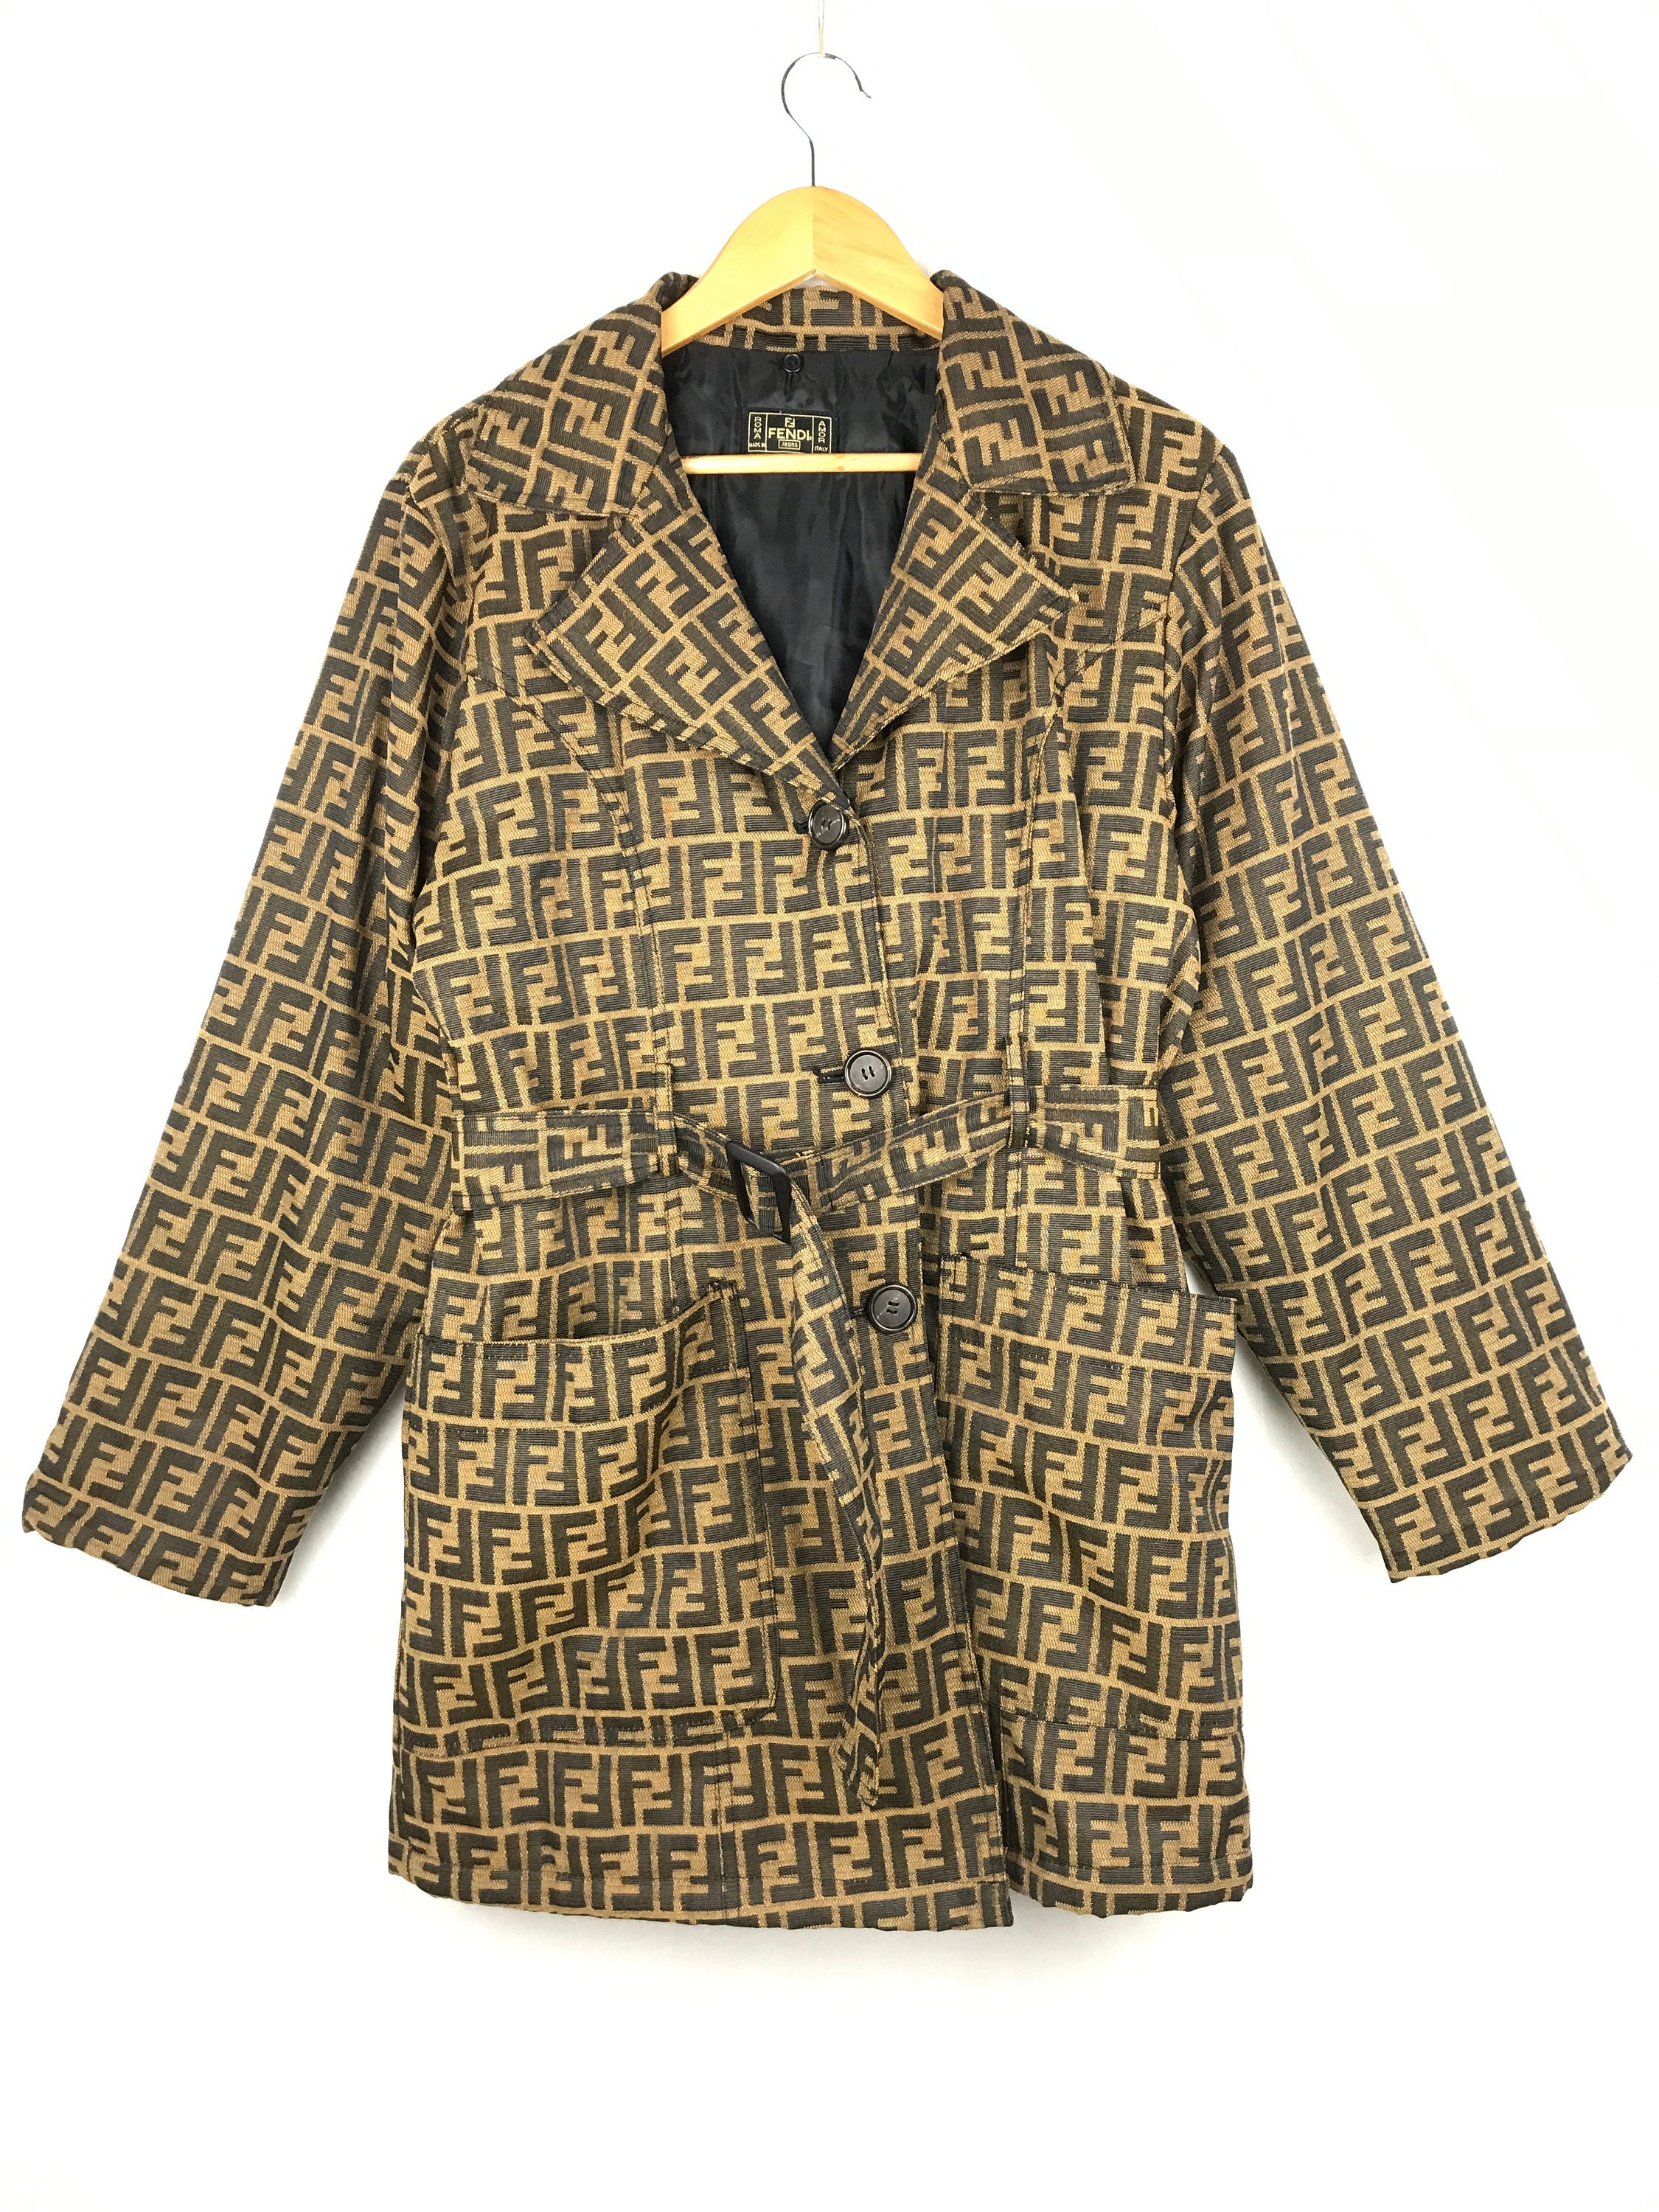 Dior x Stussy Monogram Reversible Trench coat one of one